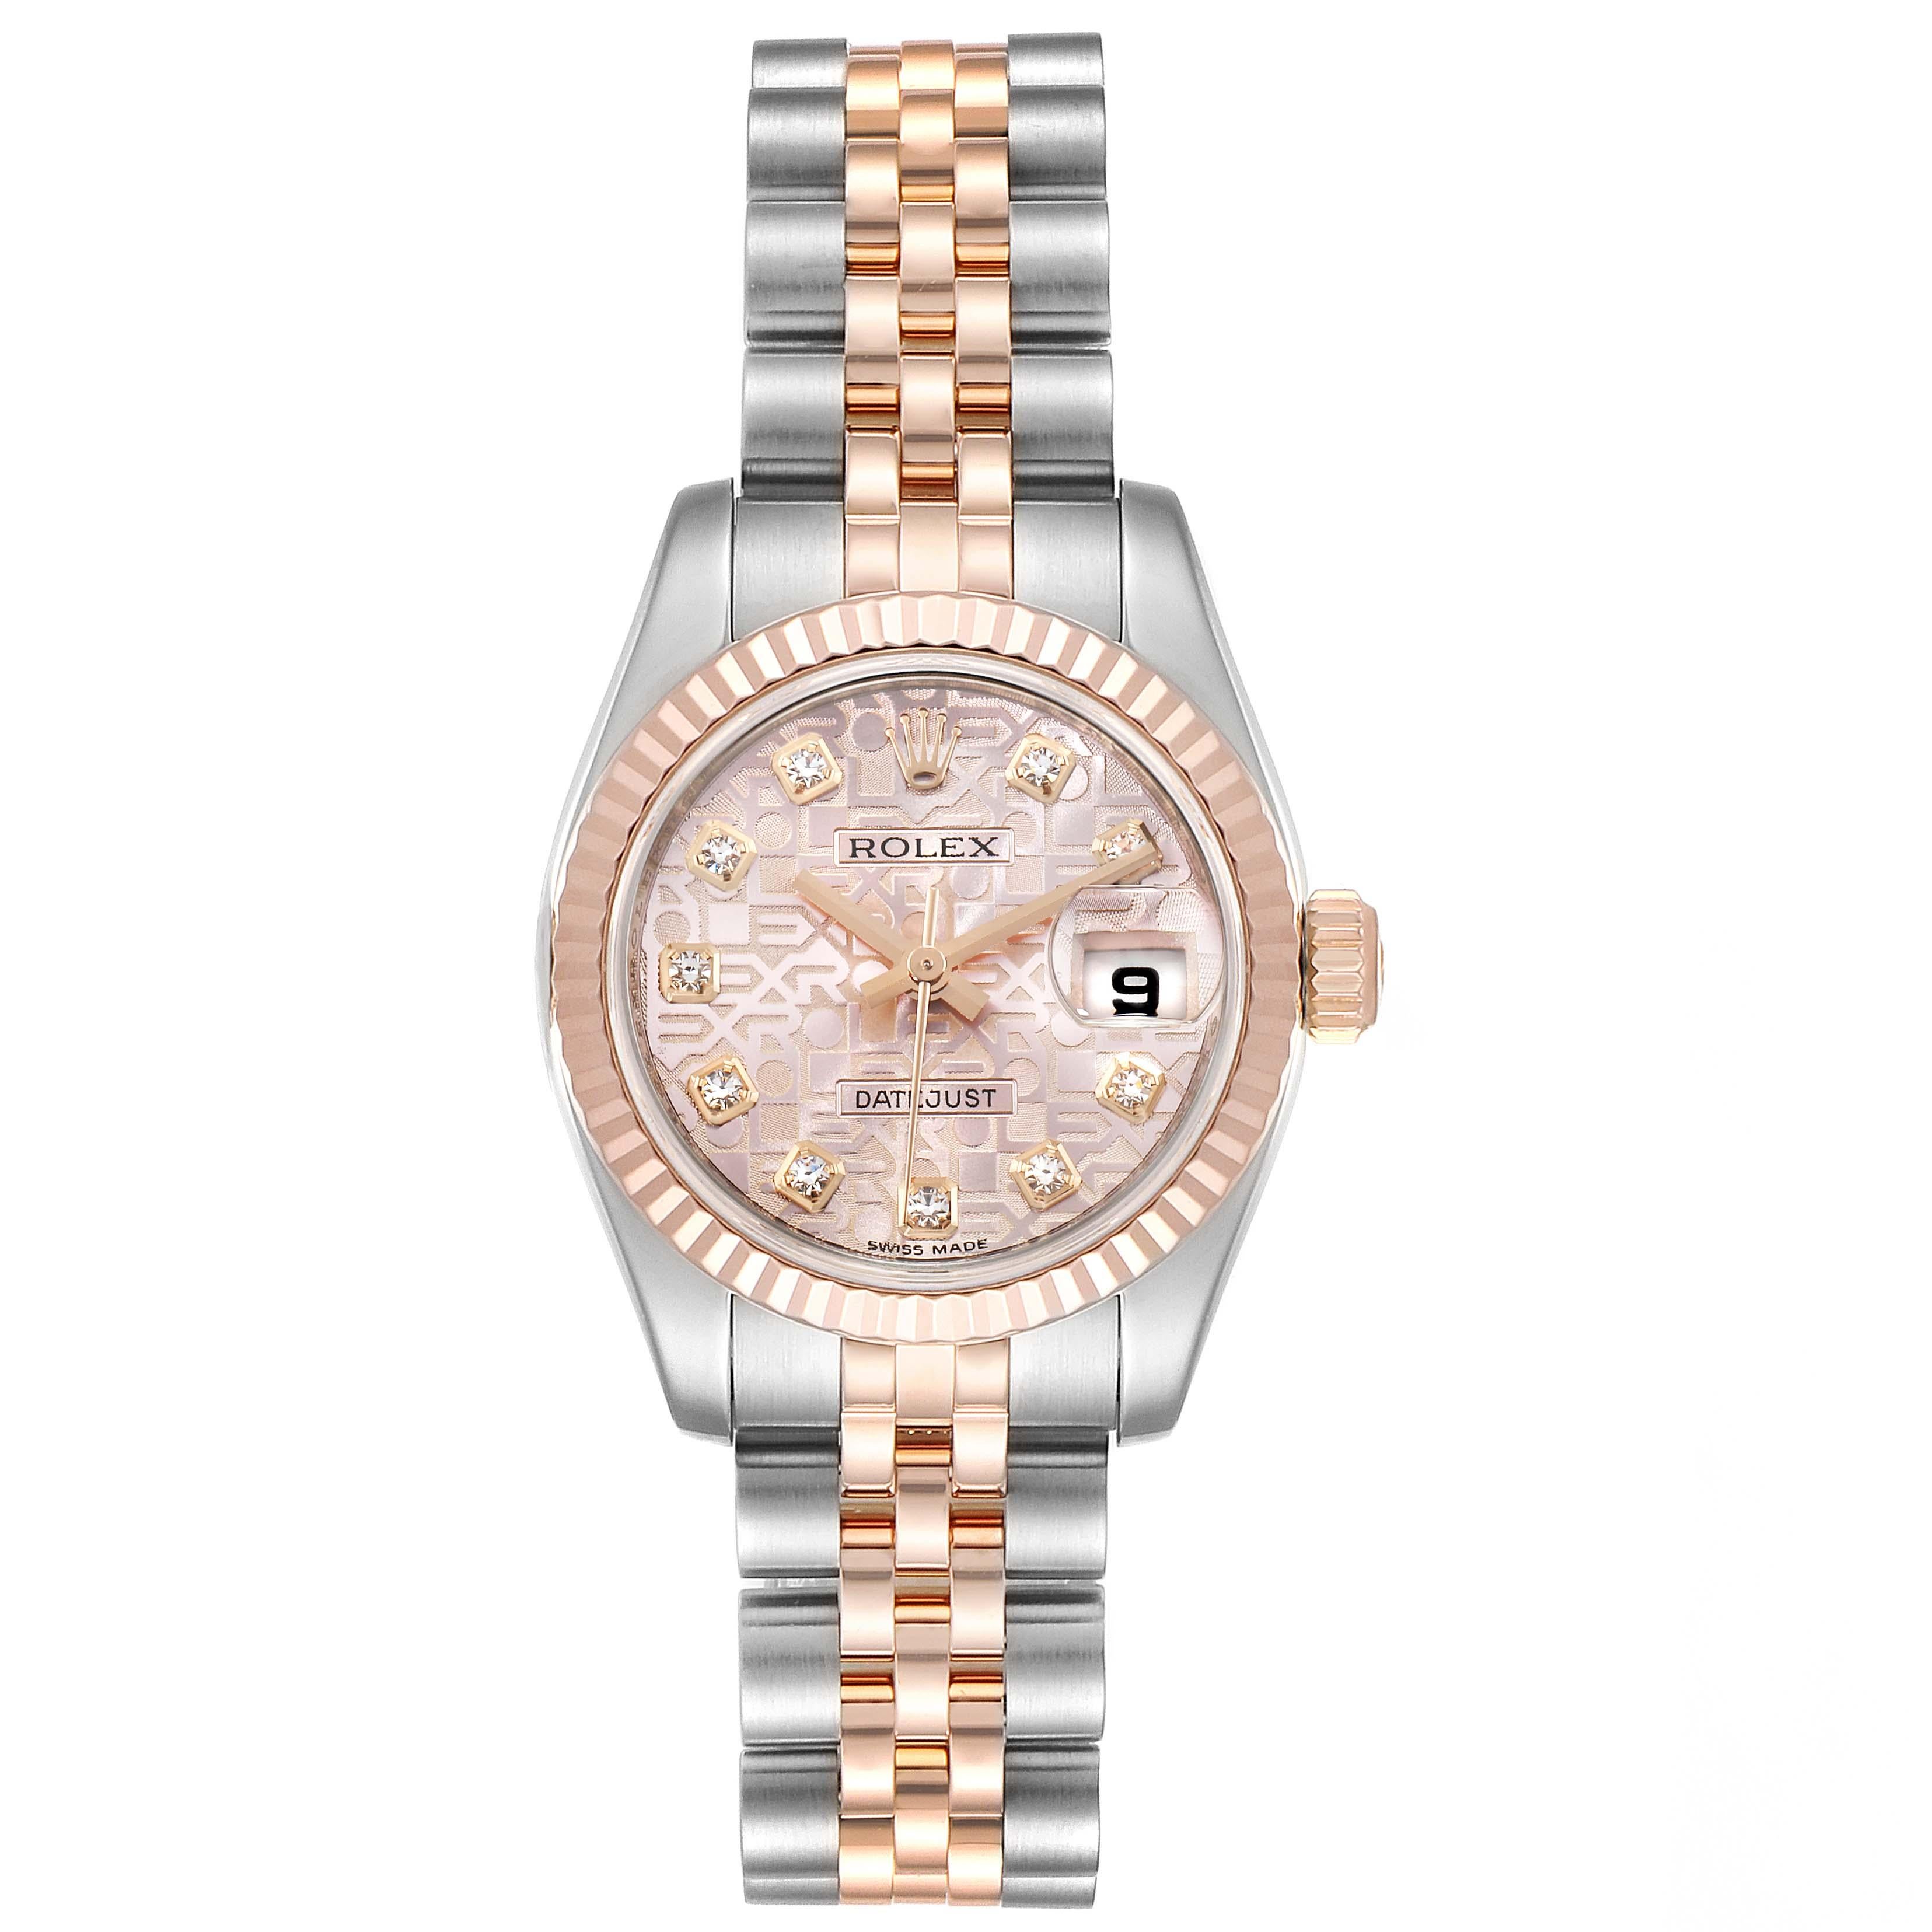 Rolex Datejust EveRose Gold Steel Diamond Ladies Watch 179171. Officially certified chronometer self-winding movement. Stainless steel oyster case 26.0 mm in diameter. Rolex logo on a 18K rose gold crown. 18k rose gold fluted bezel. Scratch